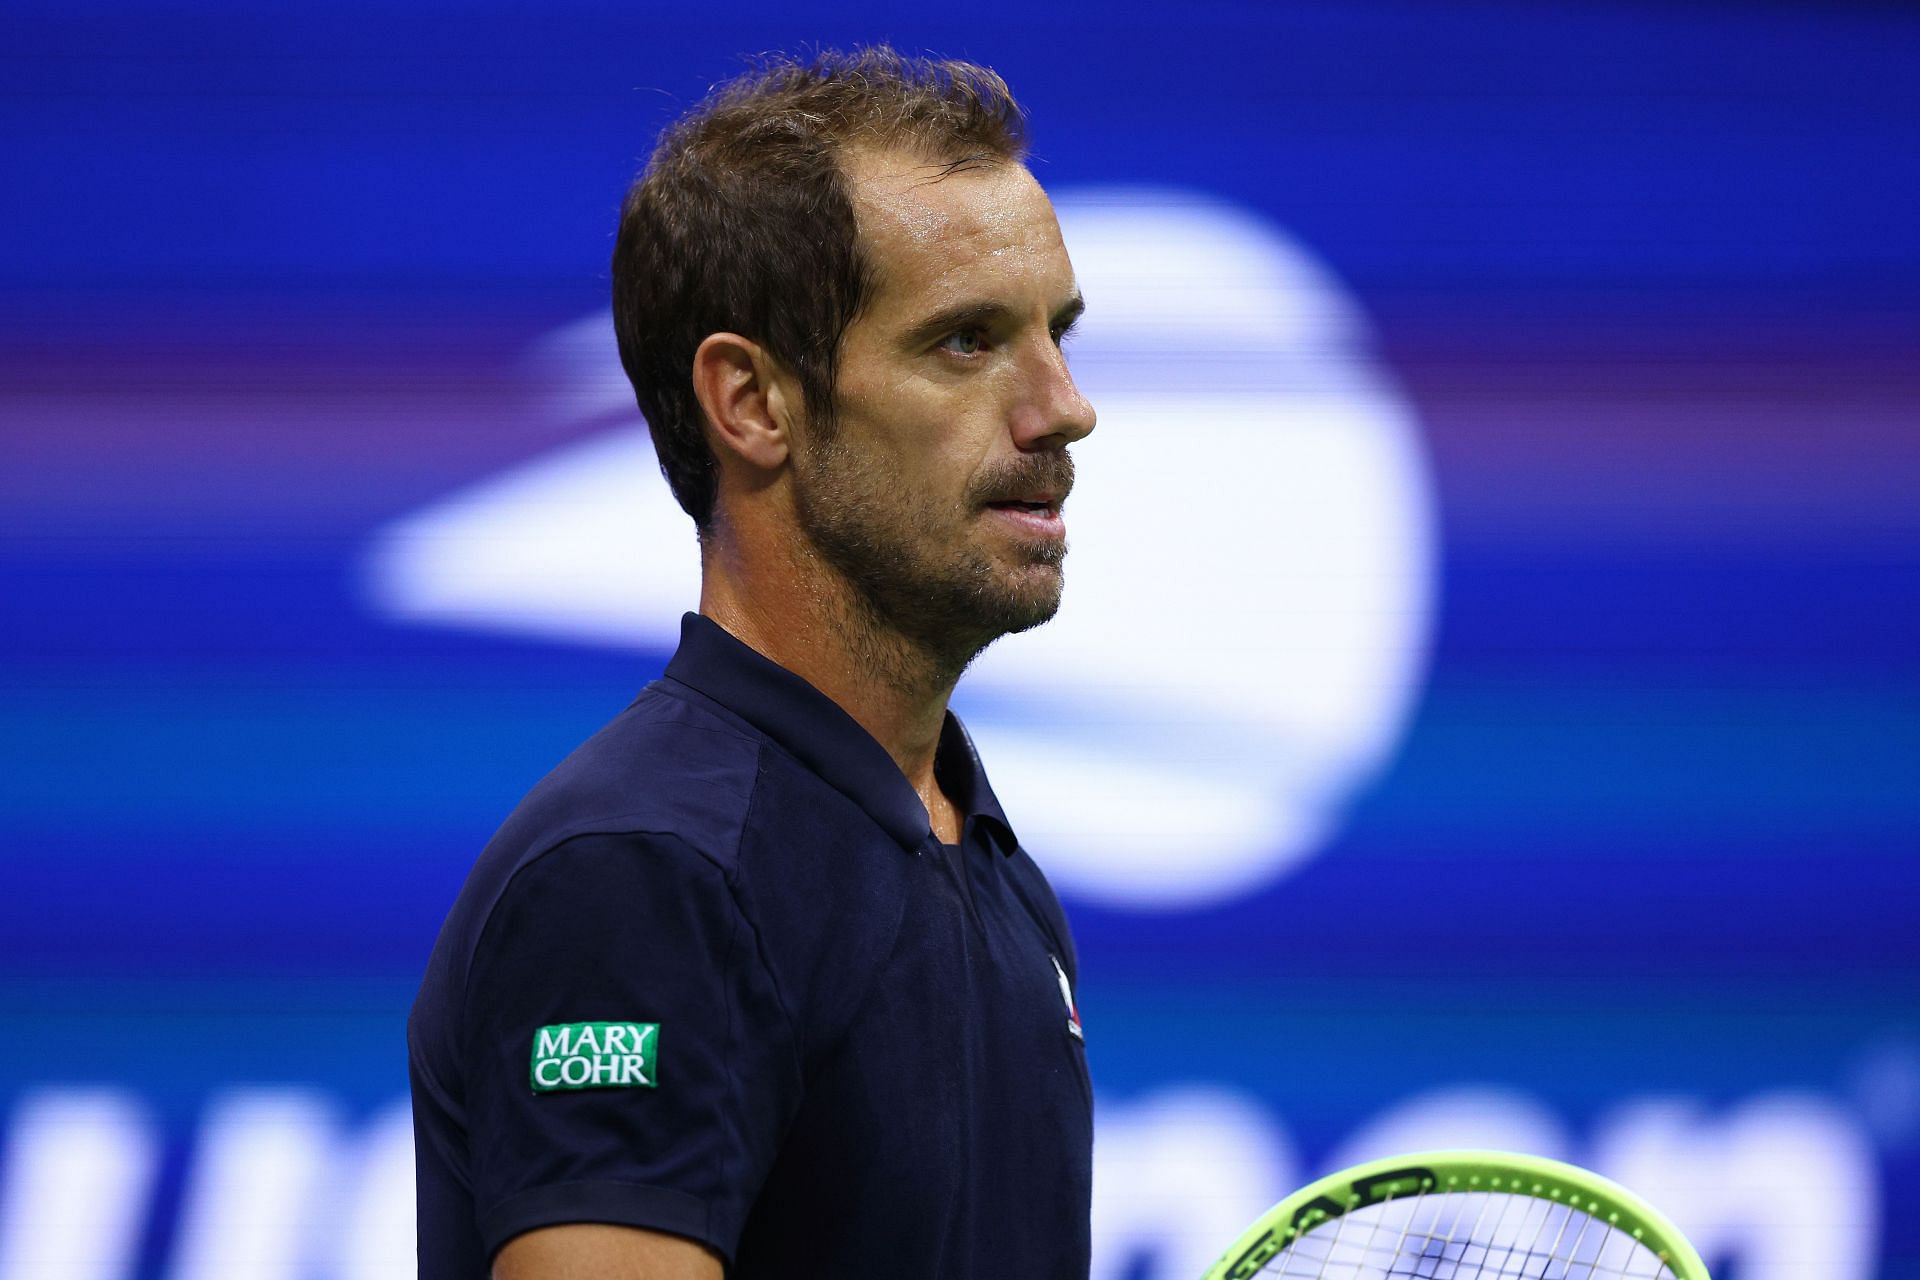 Richard Gasquet at the 2022 US Open.